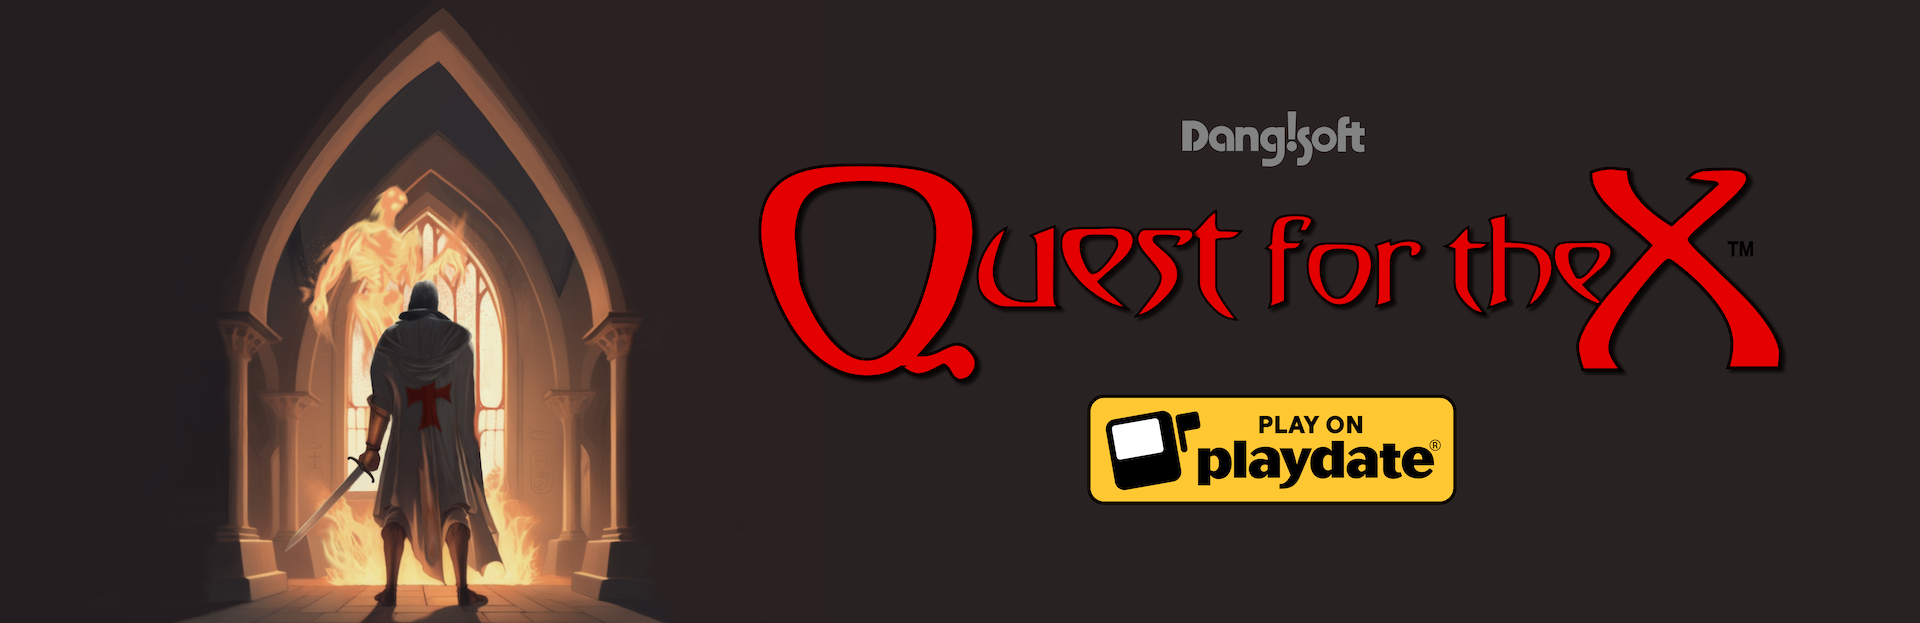 QUEST FOR THE X